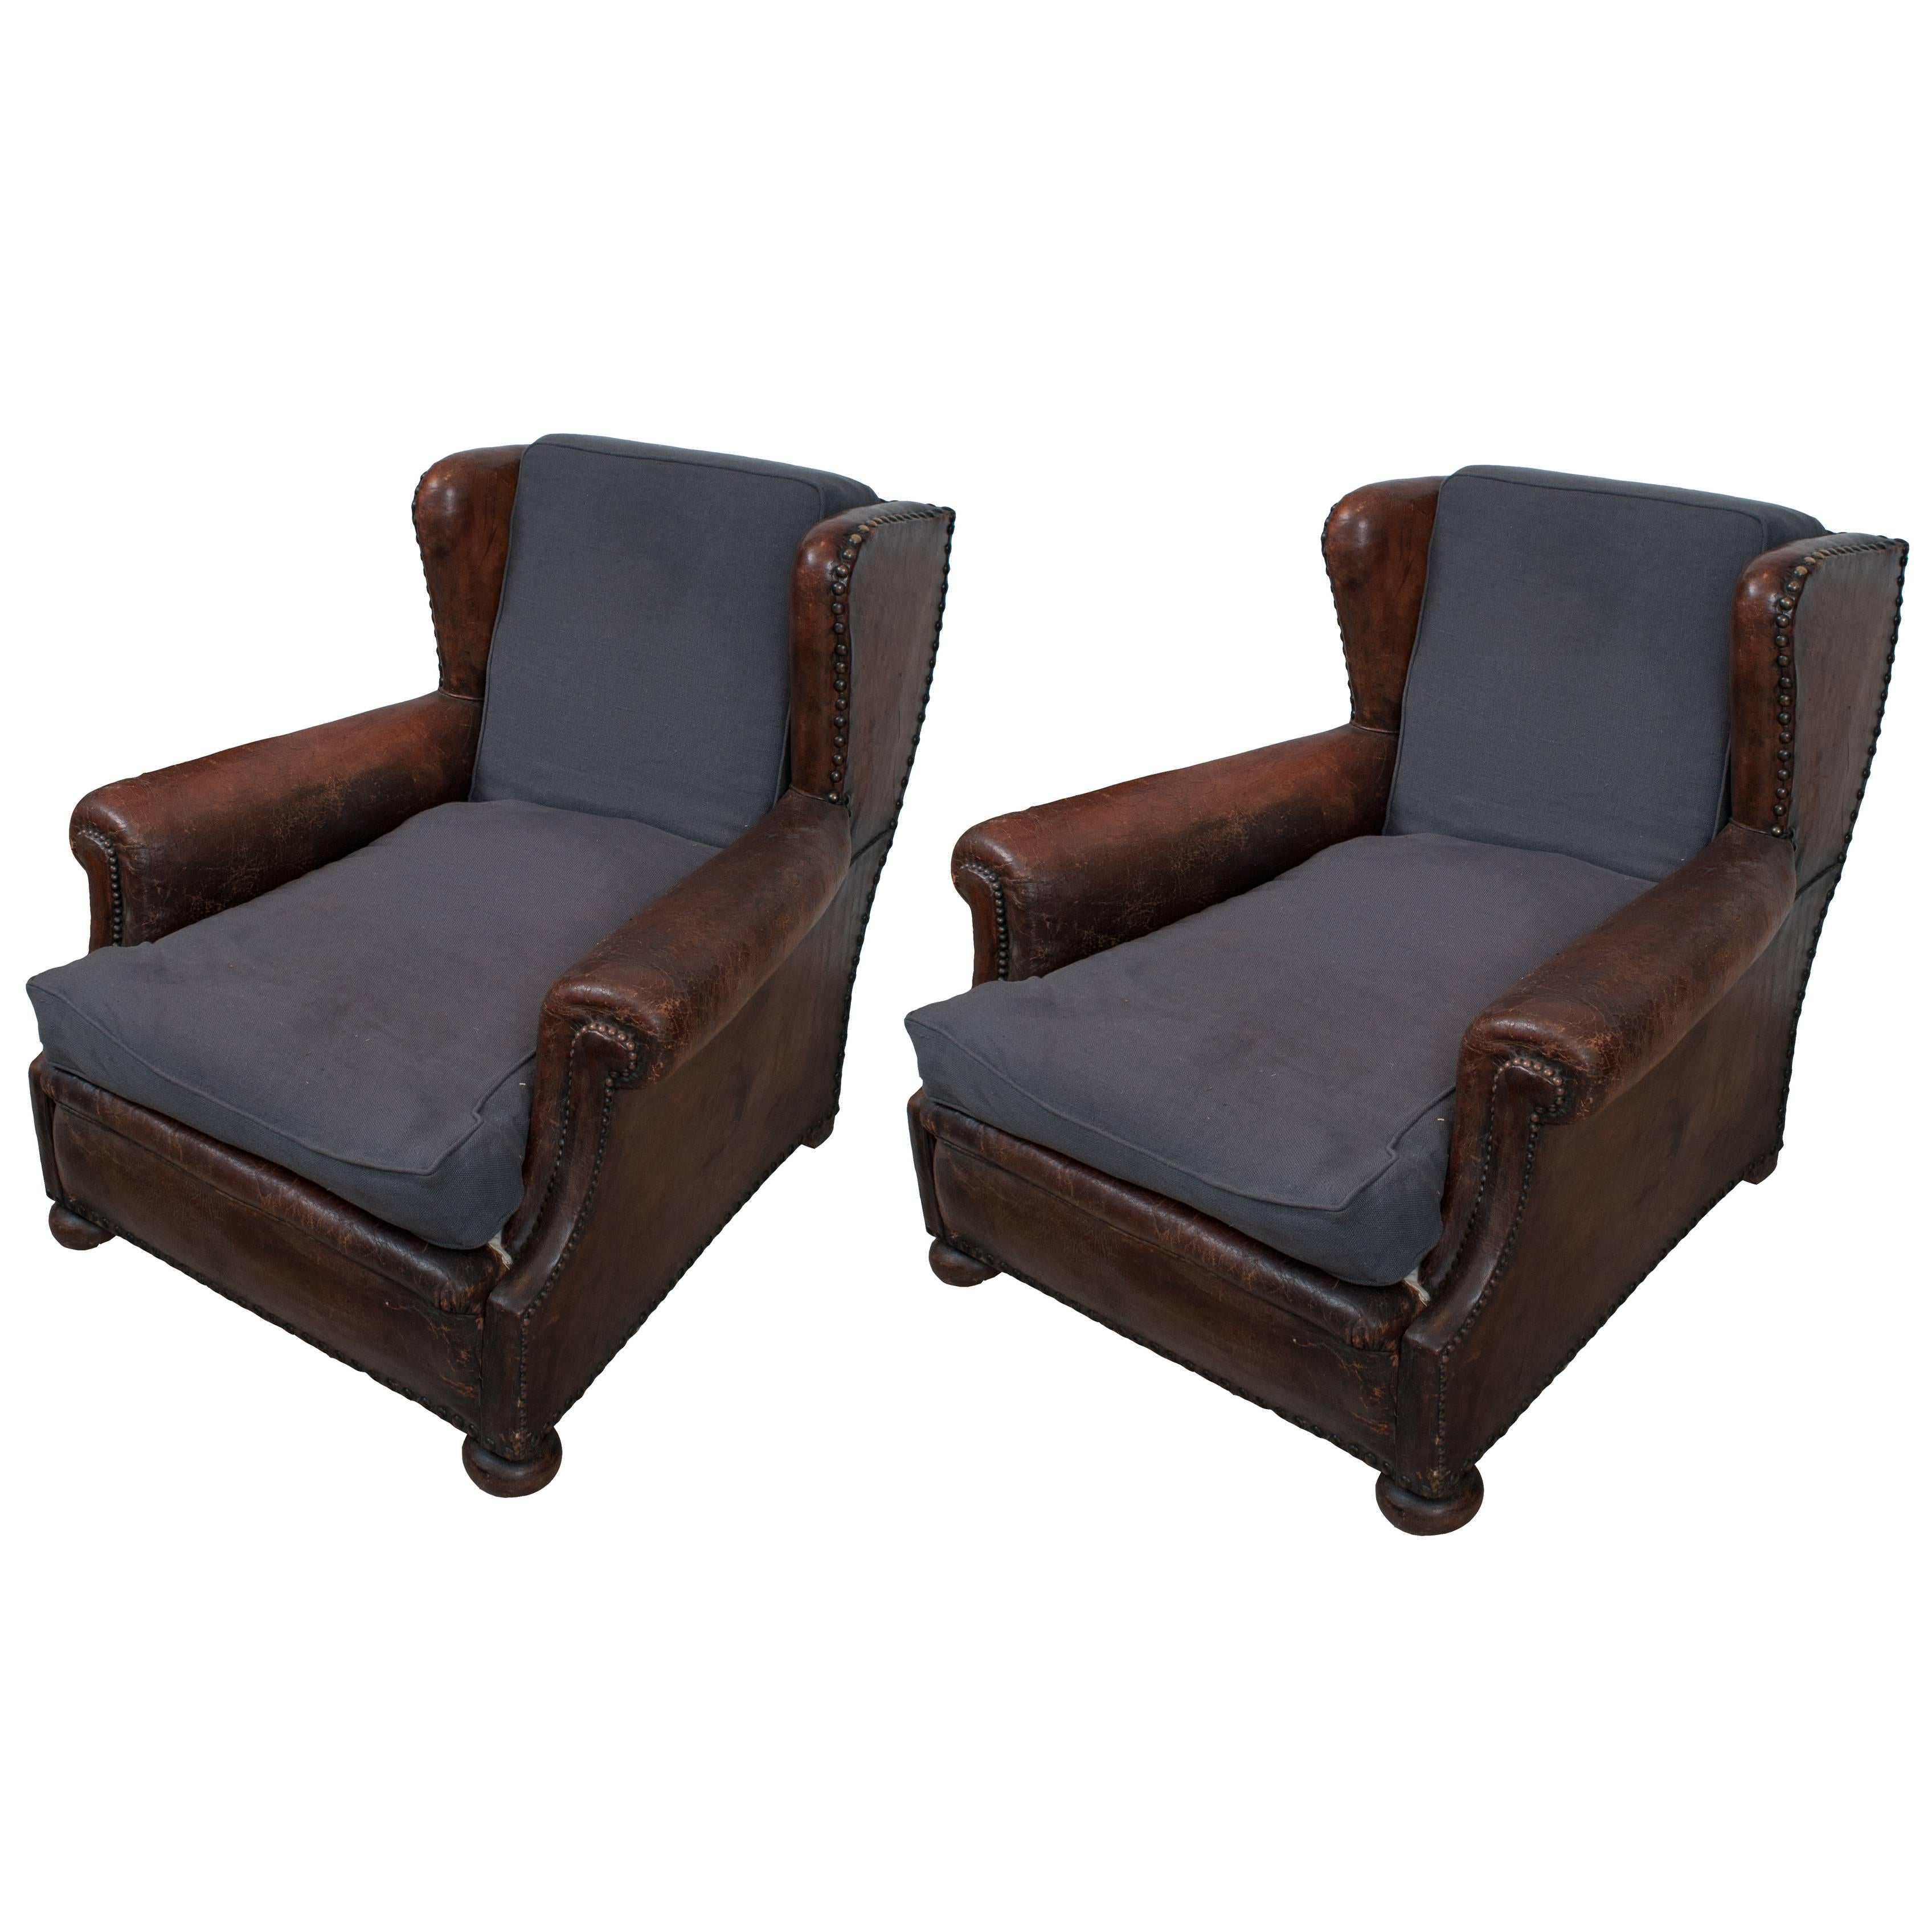 Pair of Brown Leather and Blue Linen Seat and Back Cushions Club Chairs